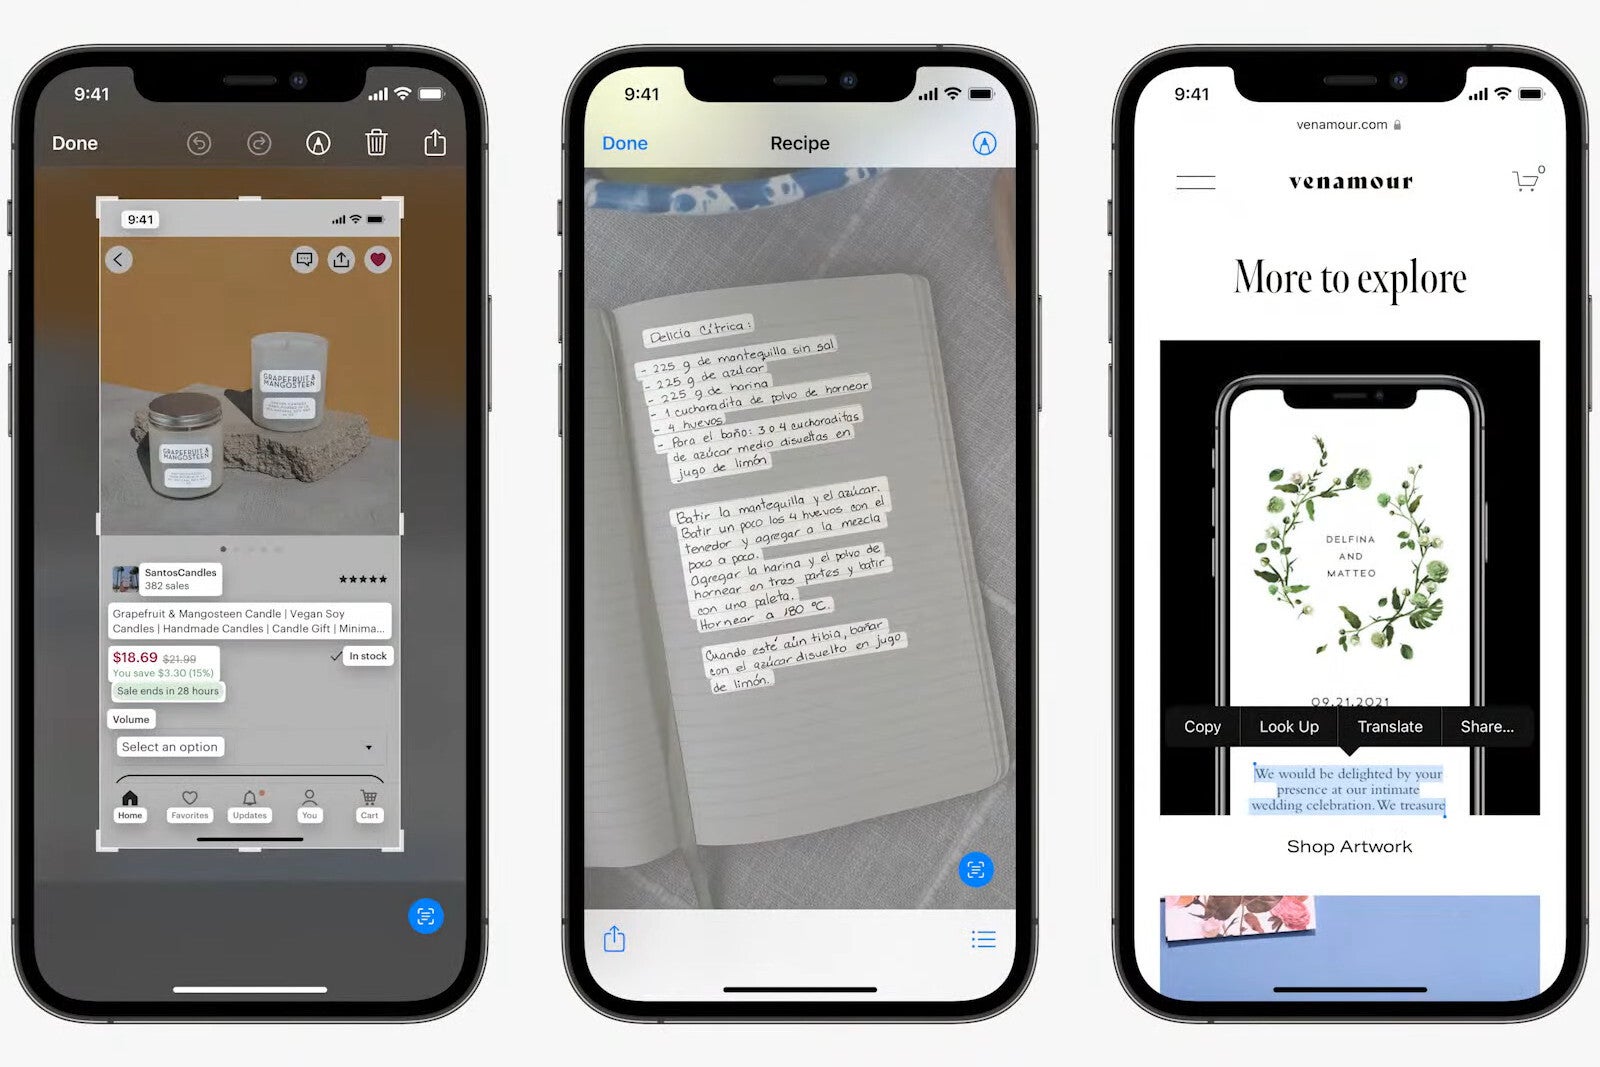 iOS 15: Apple introduces Live Text, which can locate text inside your photos